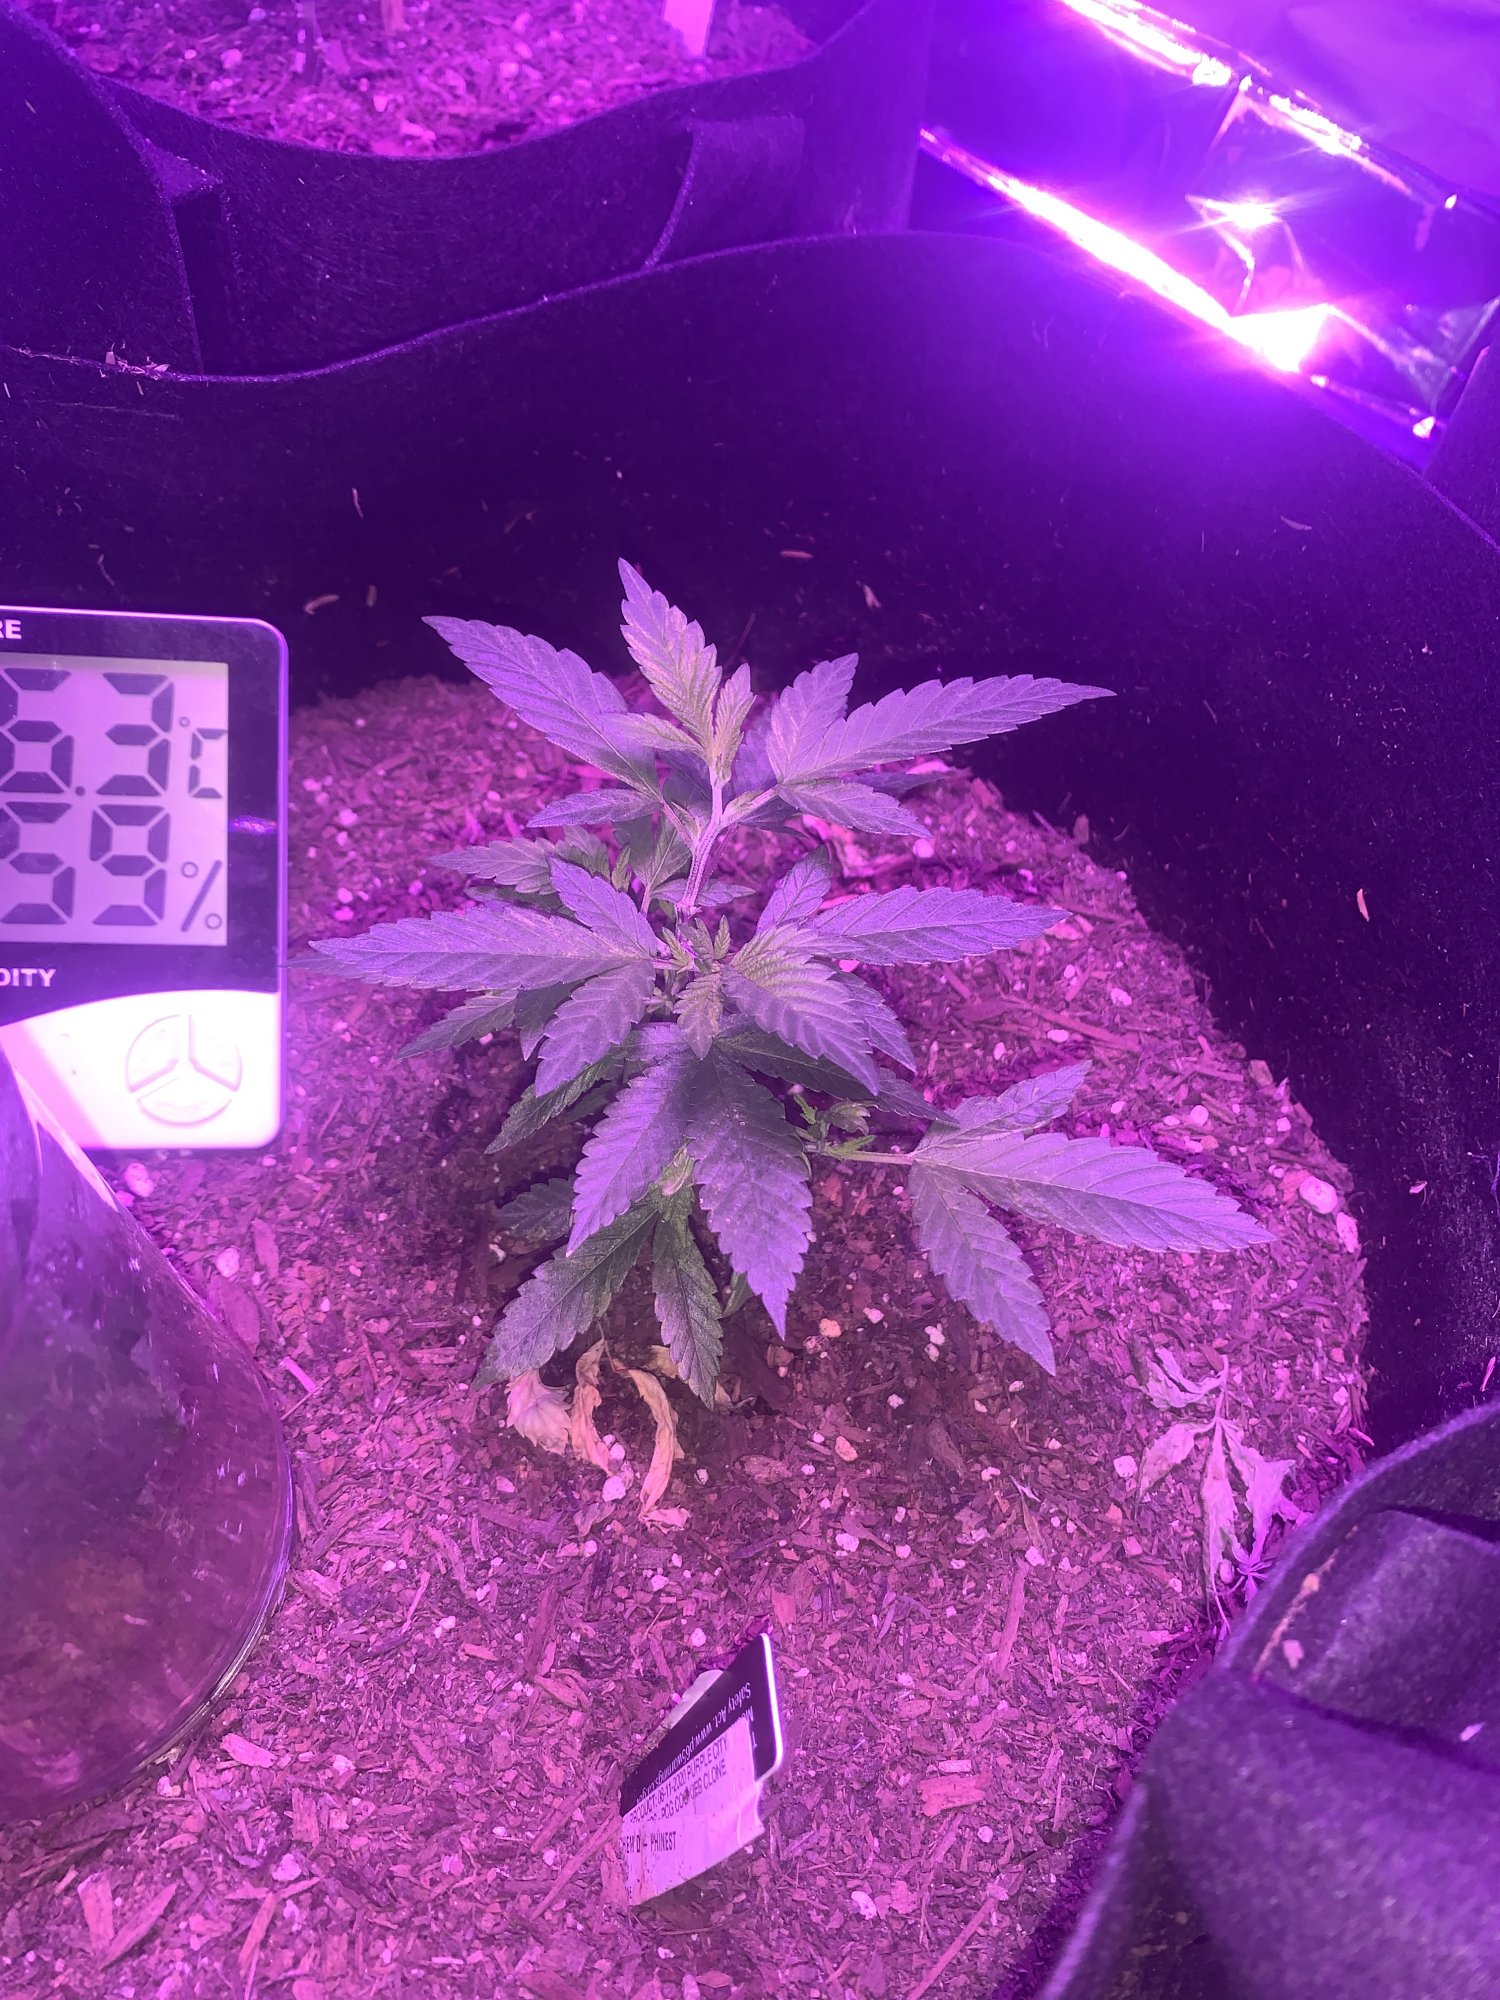 Day 52 and finally hitting a veg growth spurt 2